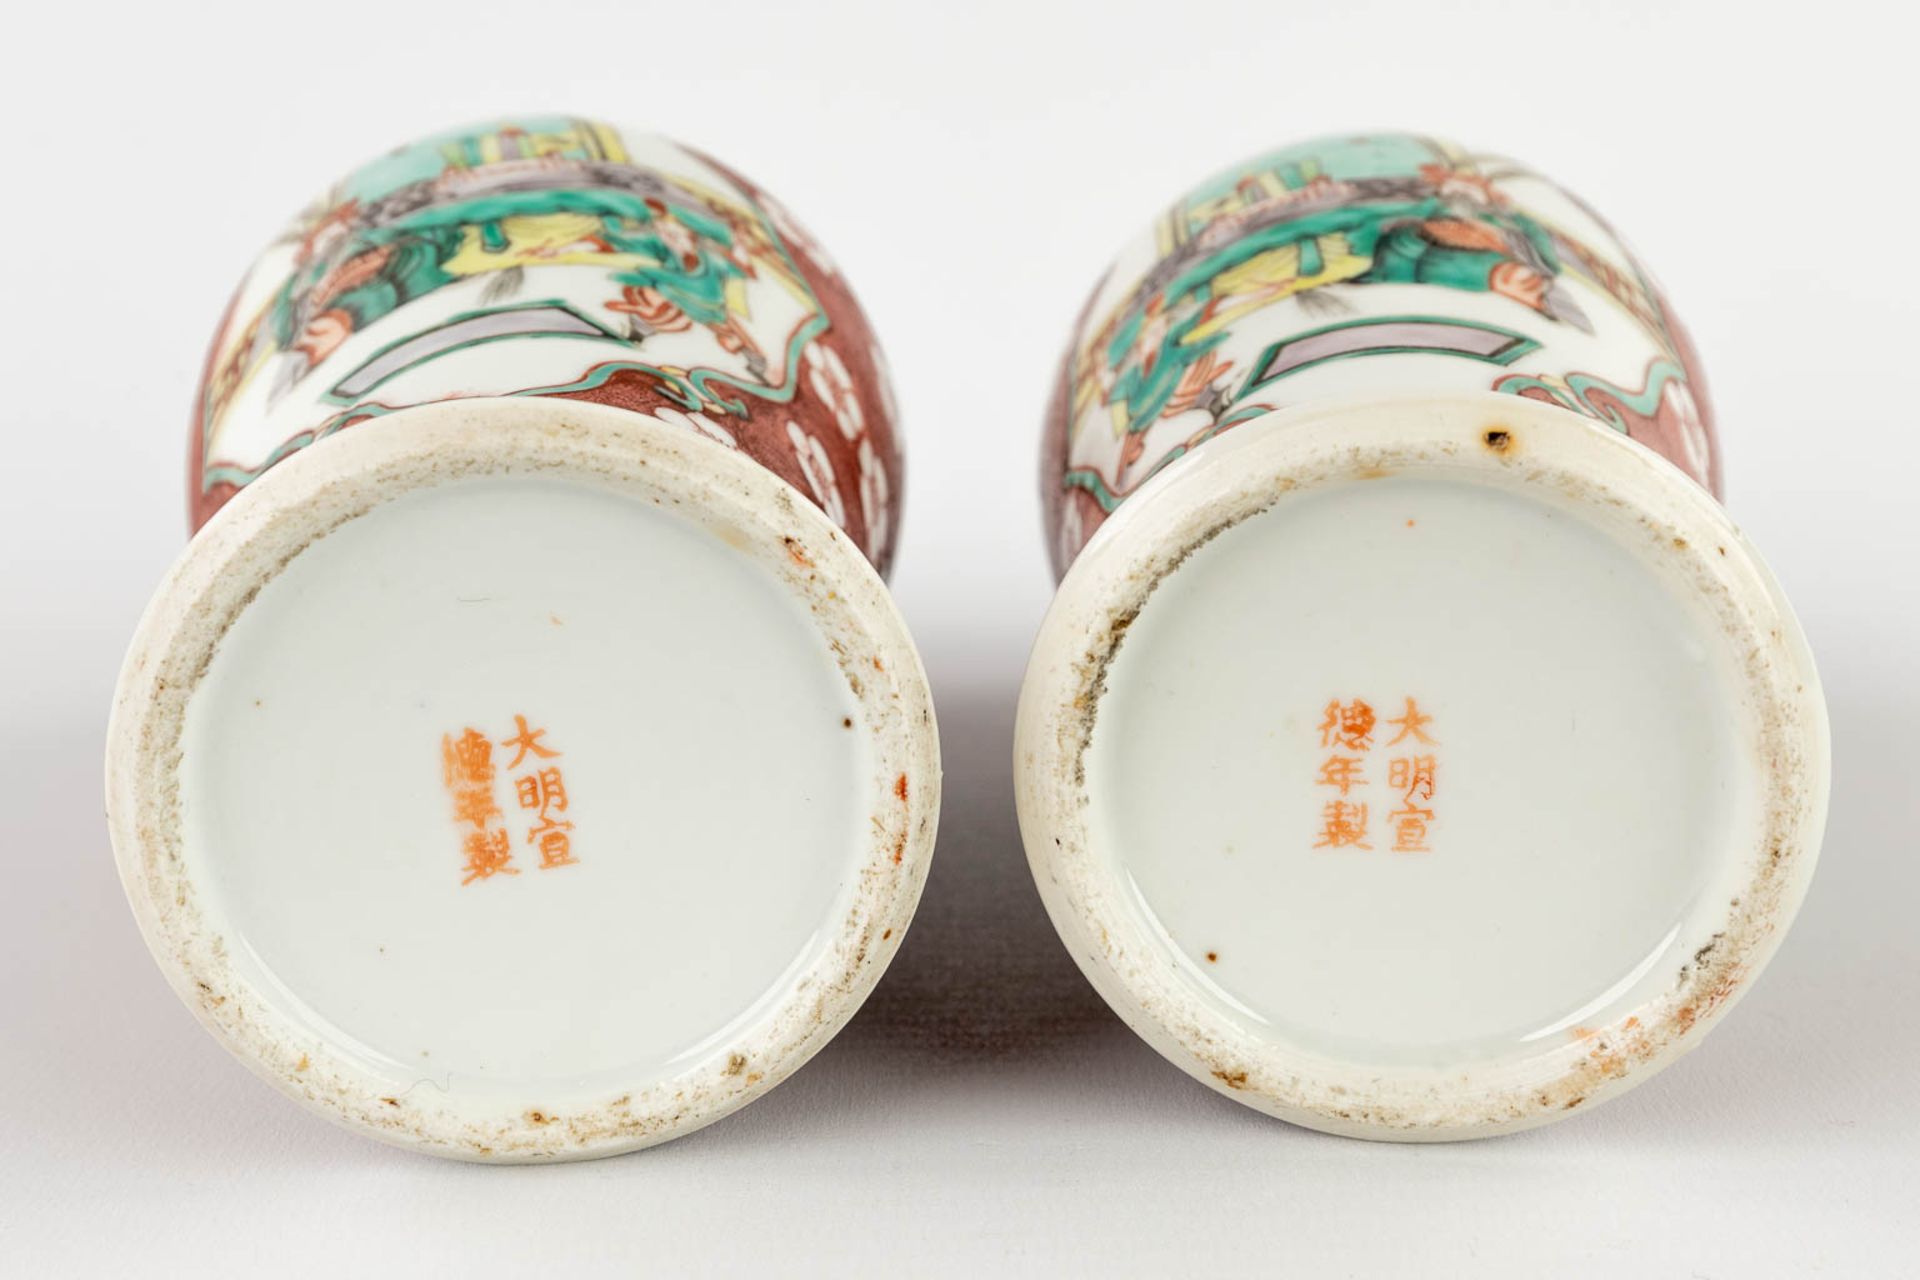 Five pieces of Chinese porcelain, decorated with hand-painted images. 19th/20th C. (H:19 x D:9 cm) - Bild 7 aus 20